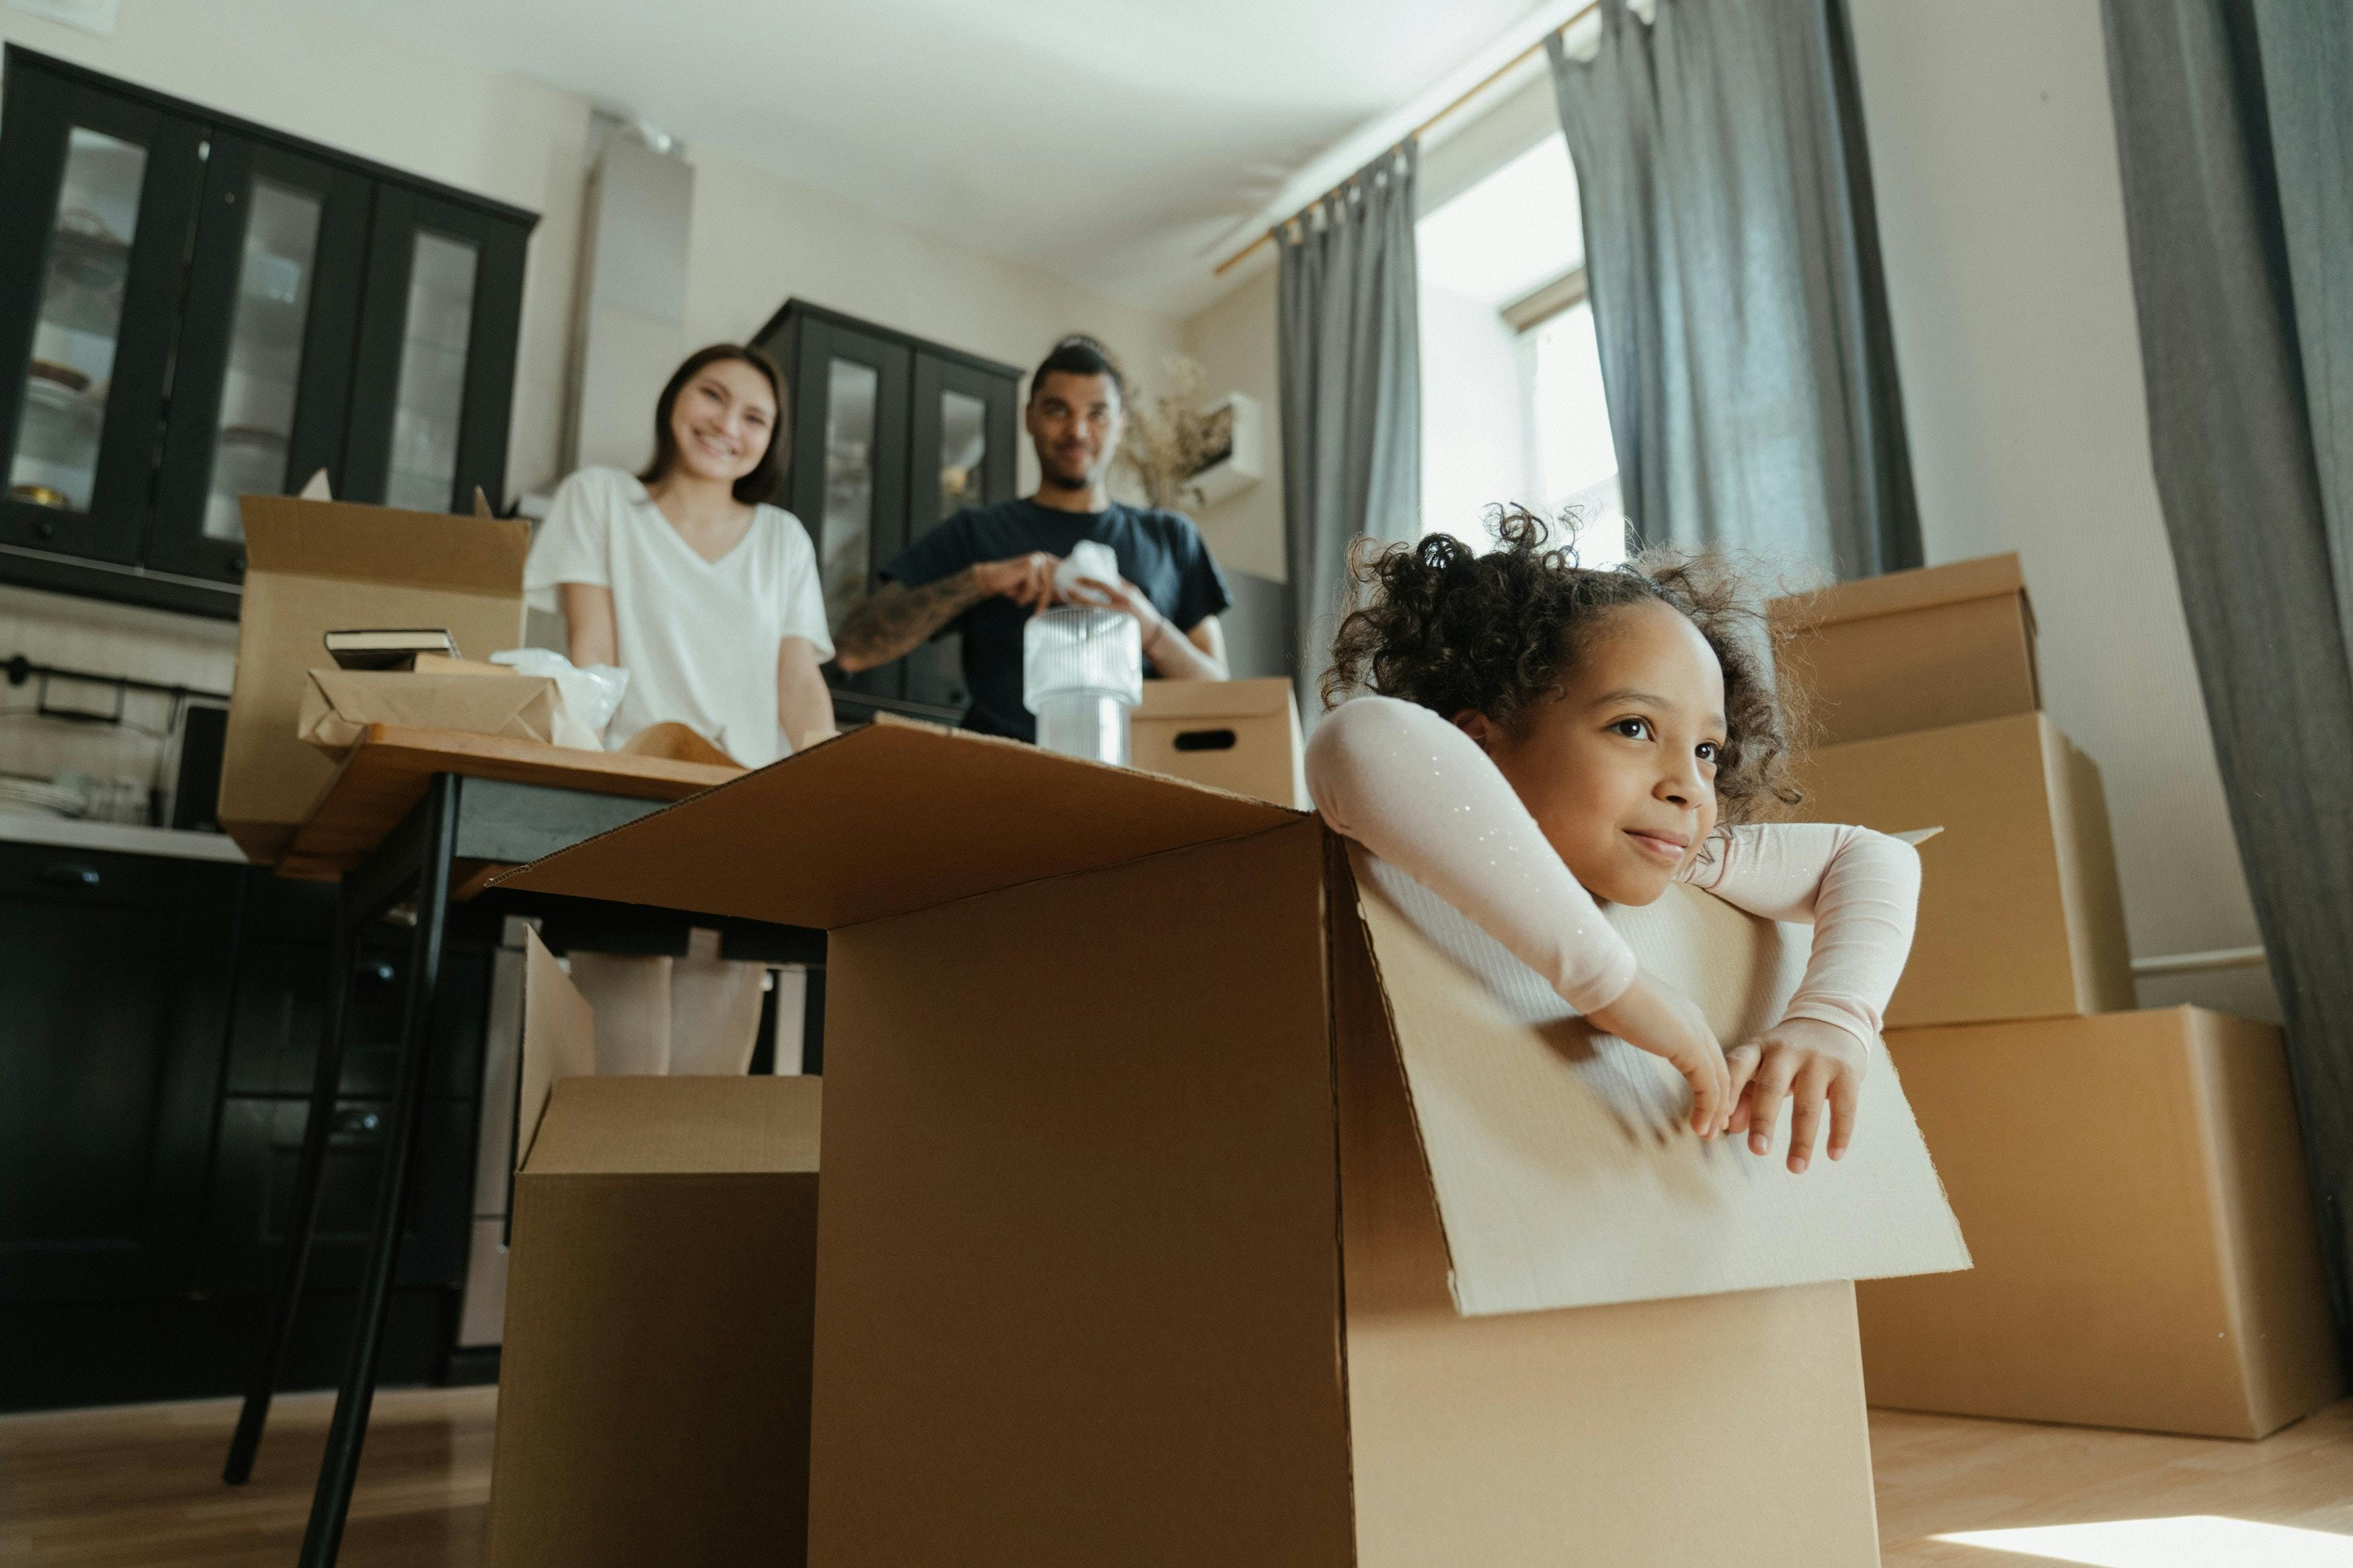 Child in moving box with parents smiling in background